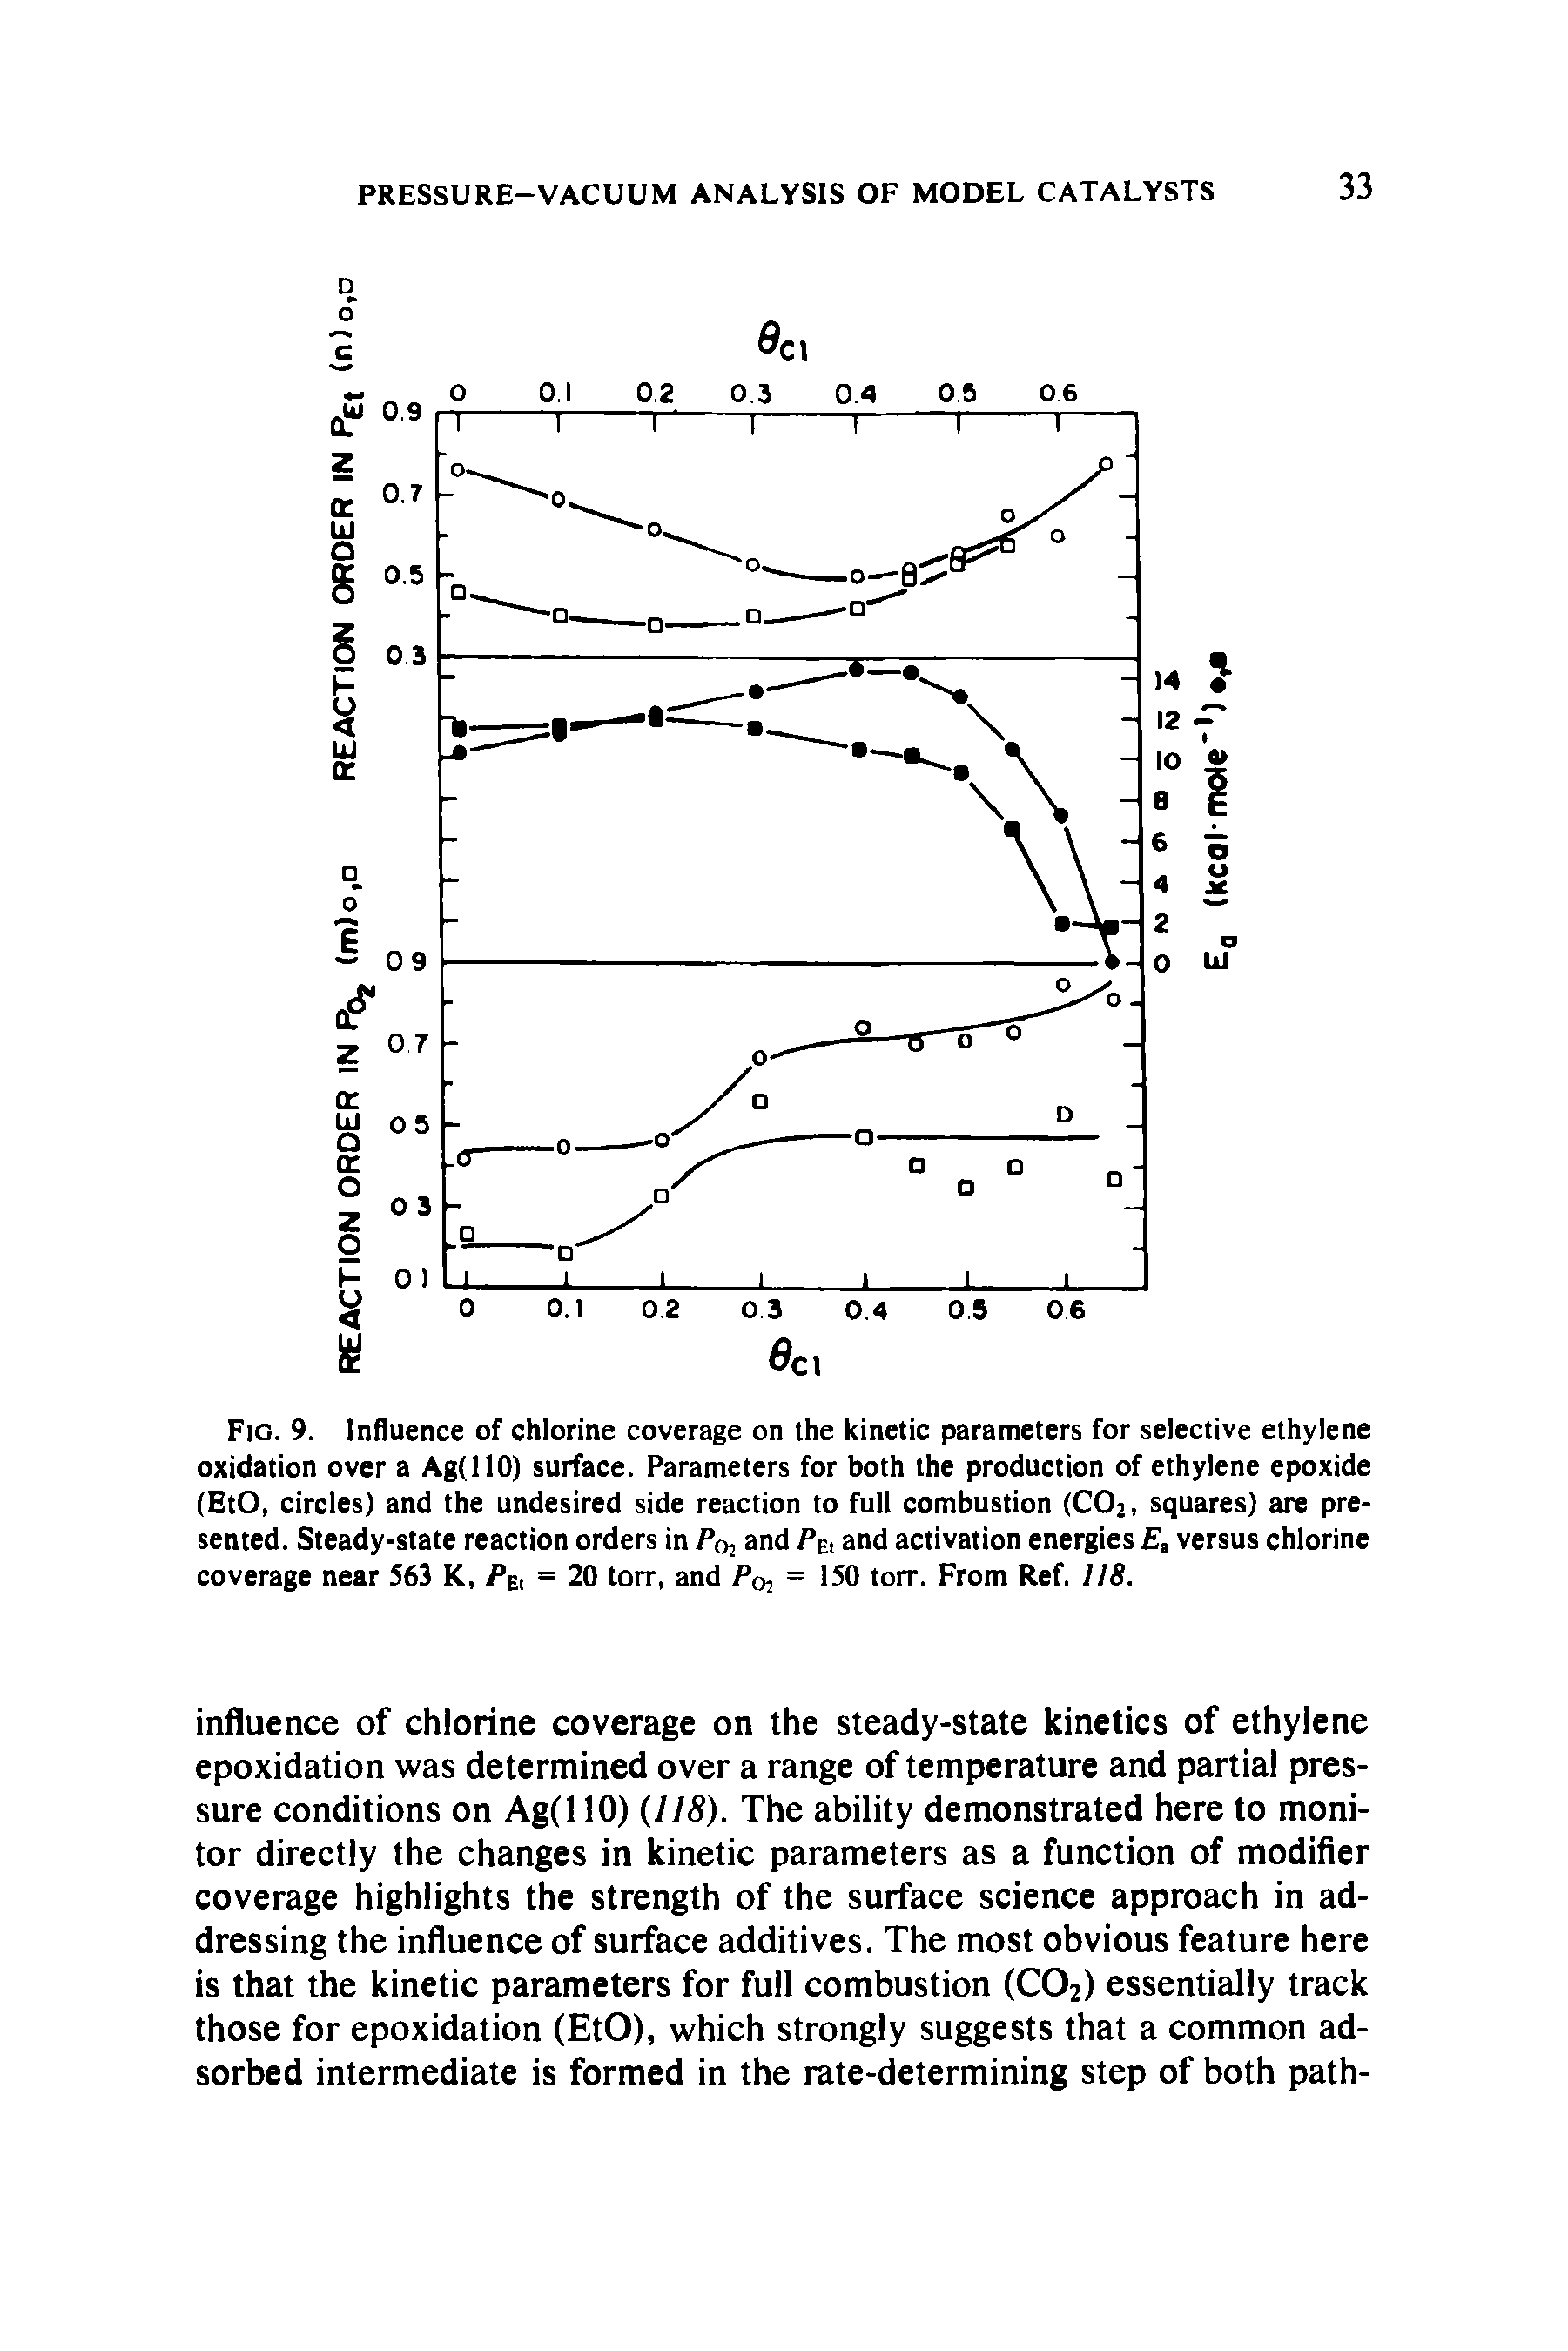 Fig. 9. Influence of chlorine coverage on the kinetic parameters for selective ethylene oxidation over a Ag(llO) surface. Parameters for both the production of ethylene epoxide (EtO, circles) and the undesired side reaction to full combustion (C02, squares) are presented. Steady-state reaction orders in P02 and Pei and activation energies a versus chlorine coverage near 563 K, Pb = 20 torr, and P02 = 150 torr. From Ref. 118.